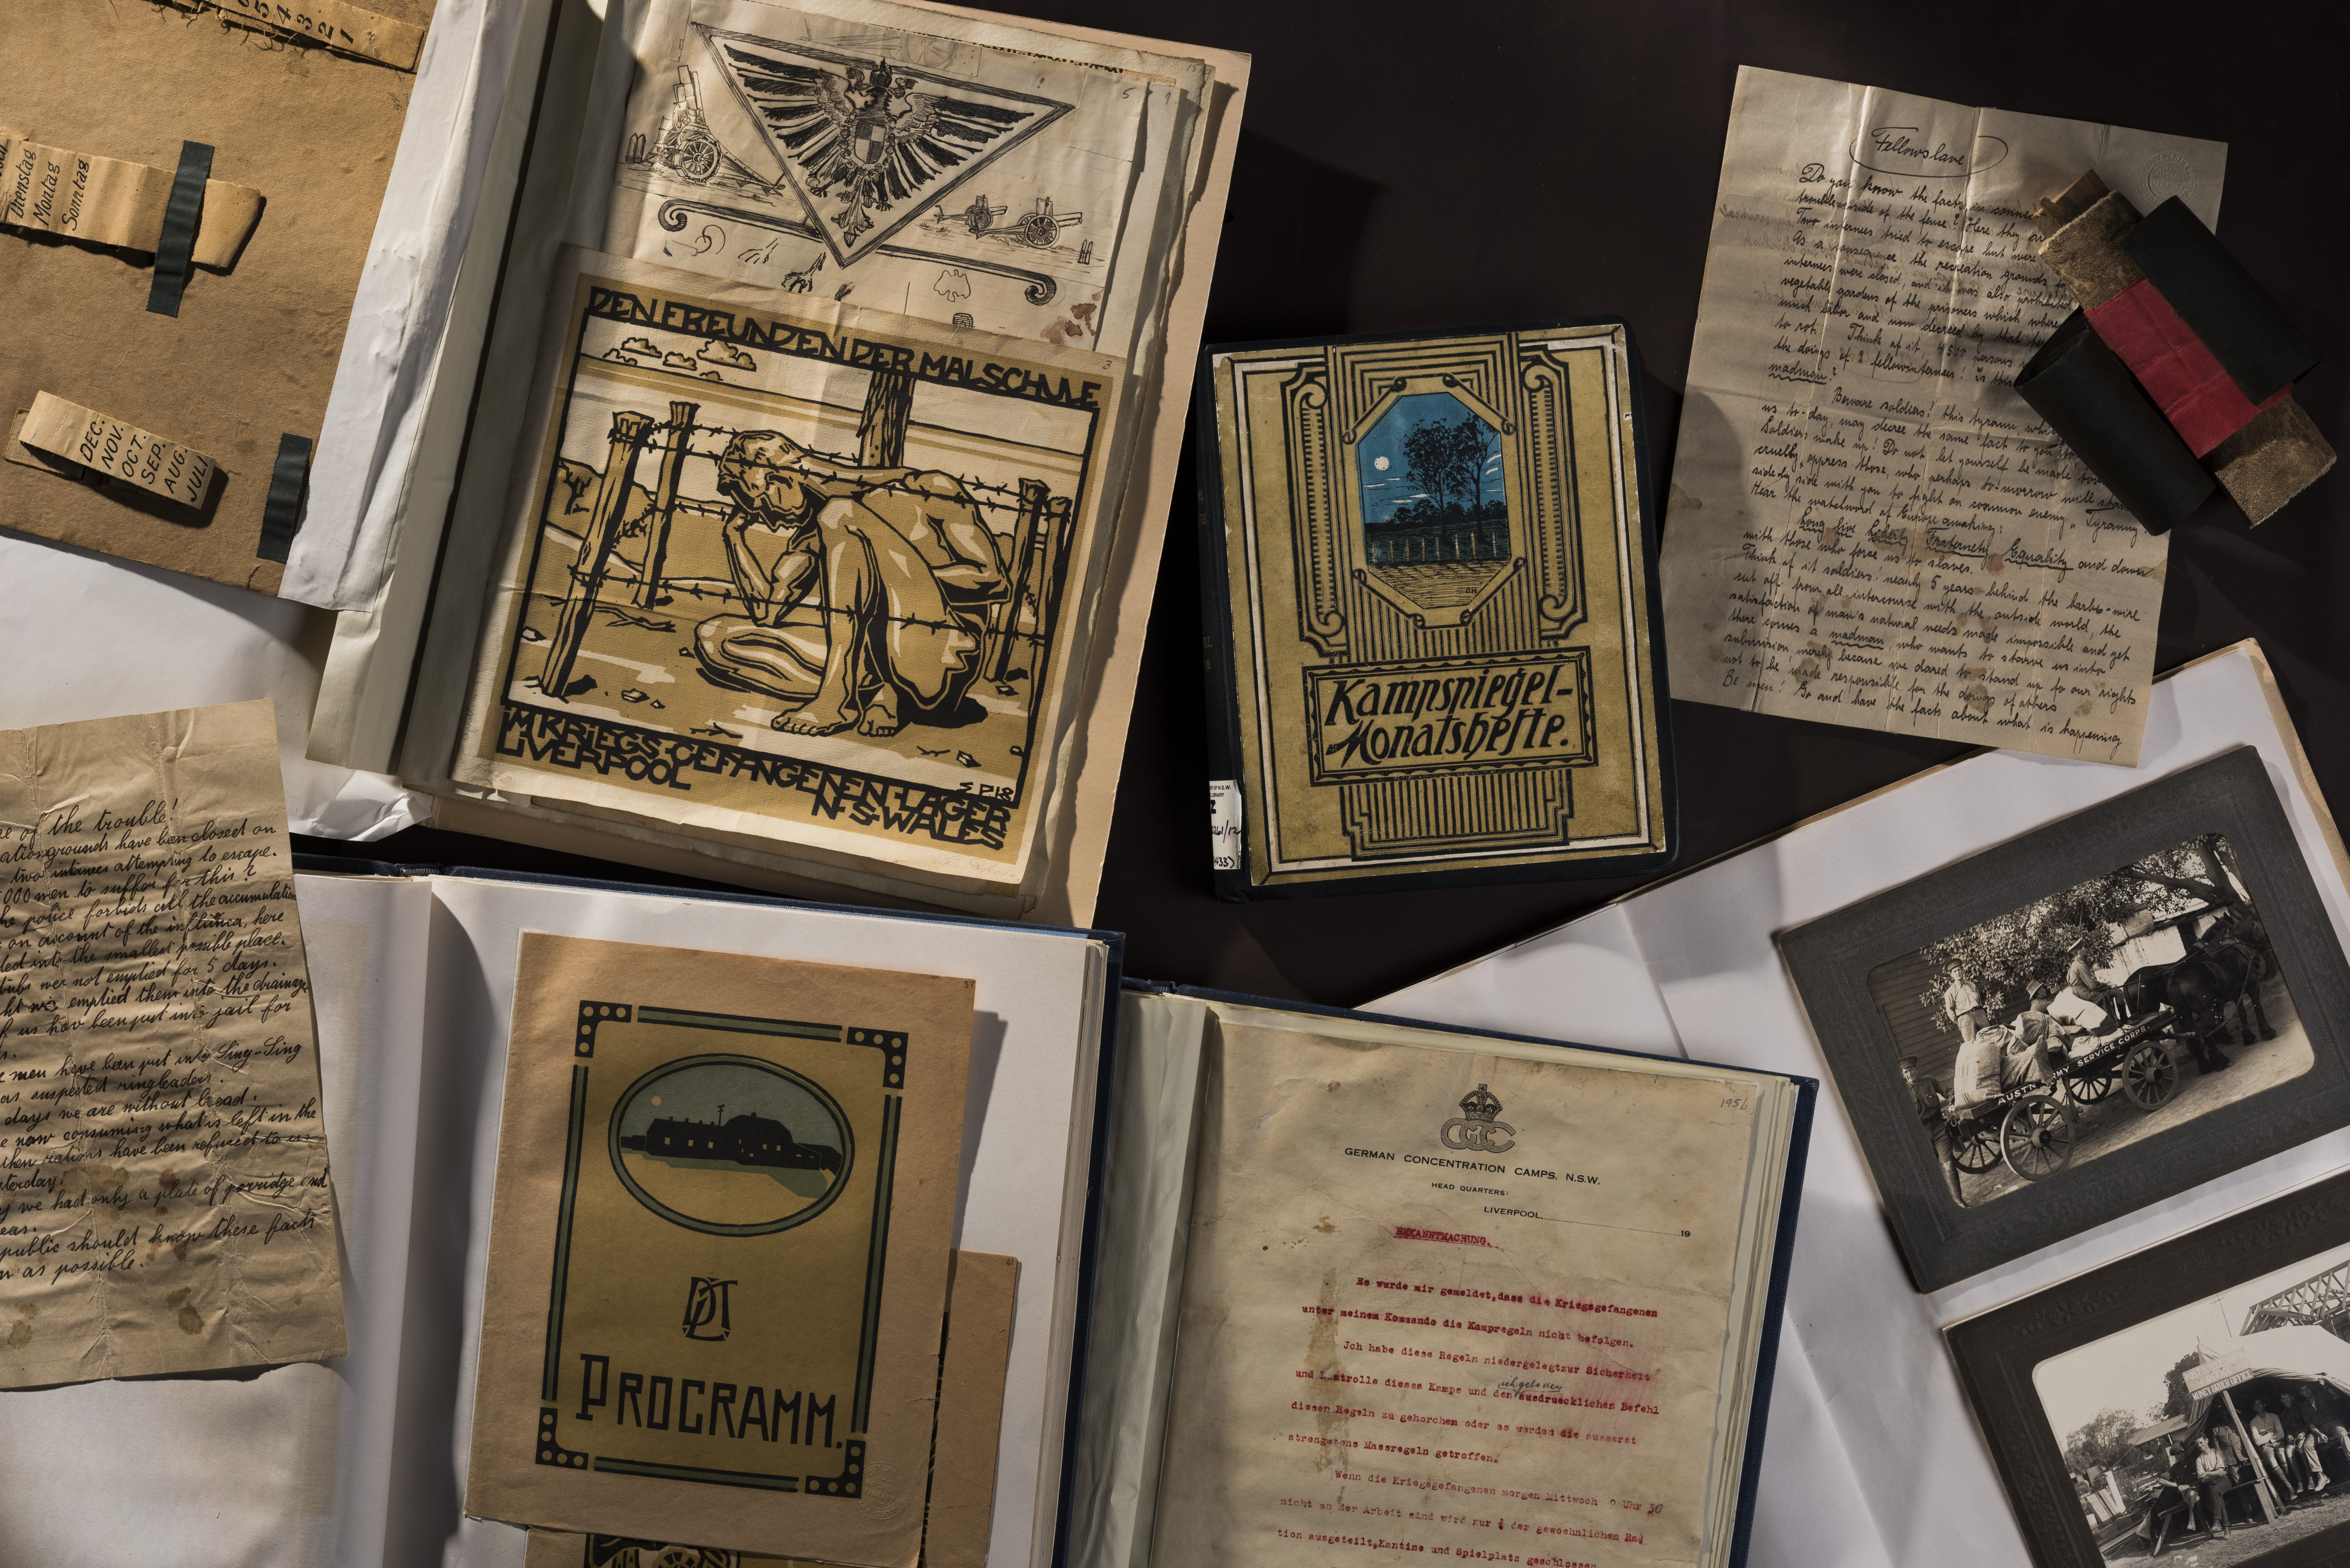 A collection of material created by internees held at the Holsworthy internment camp during the First World War